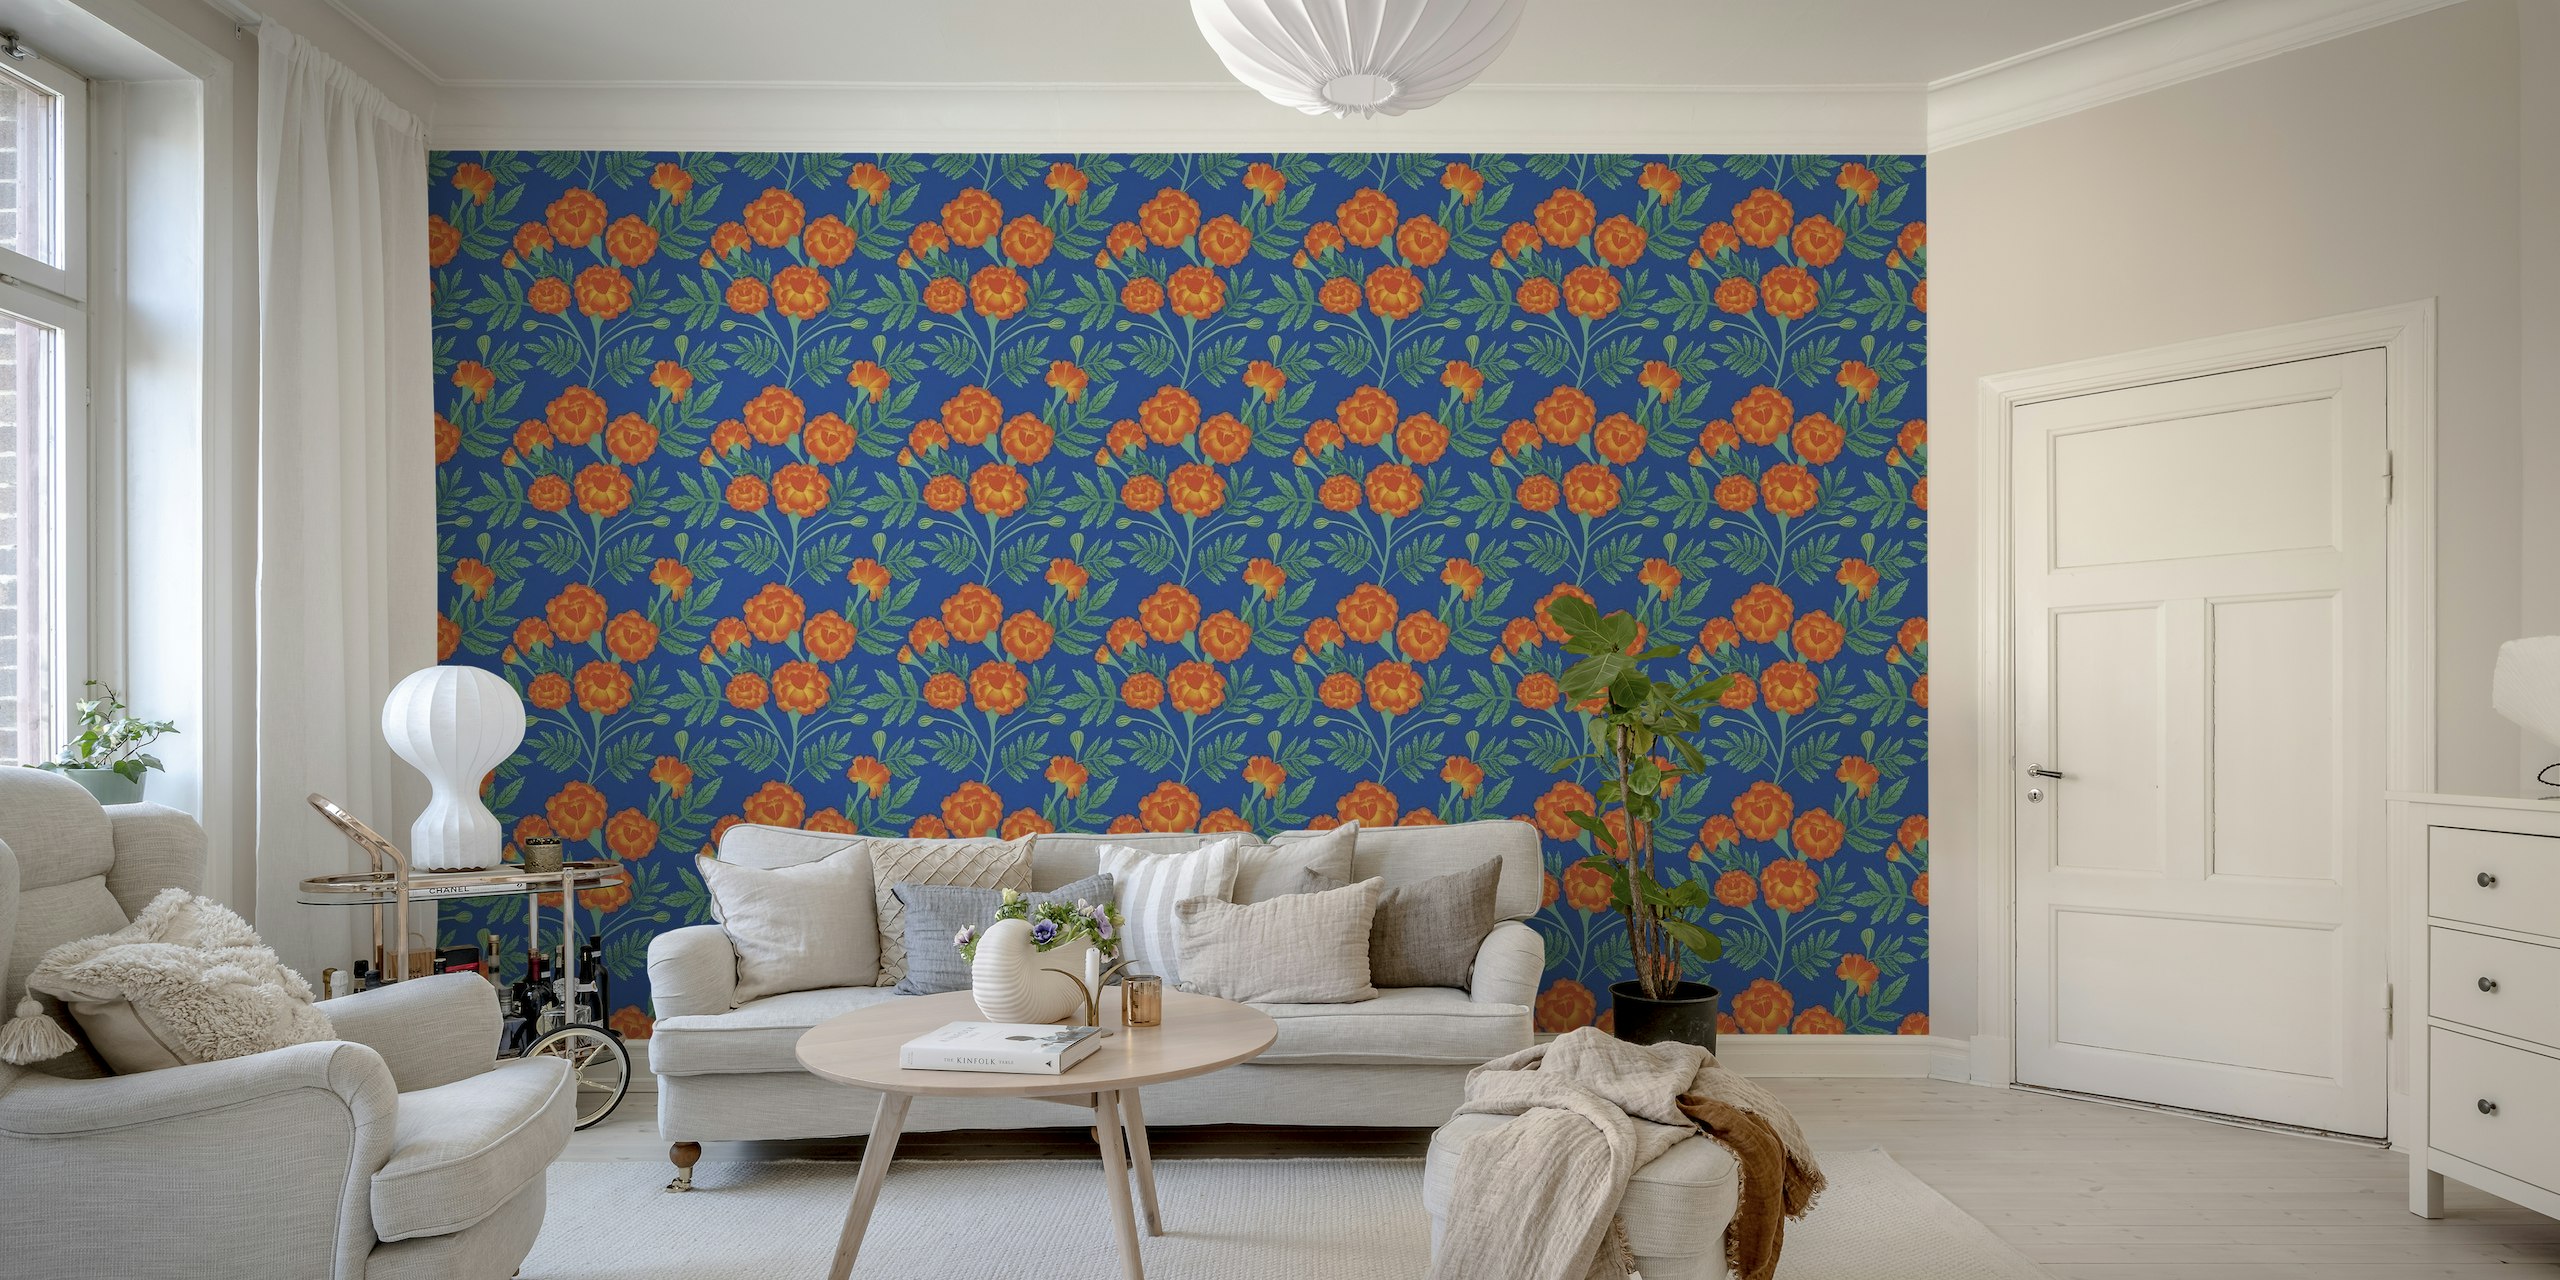 French Marigolds on Blue behang